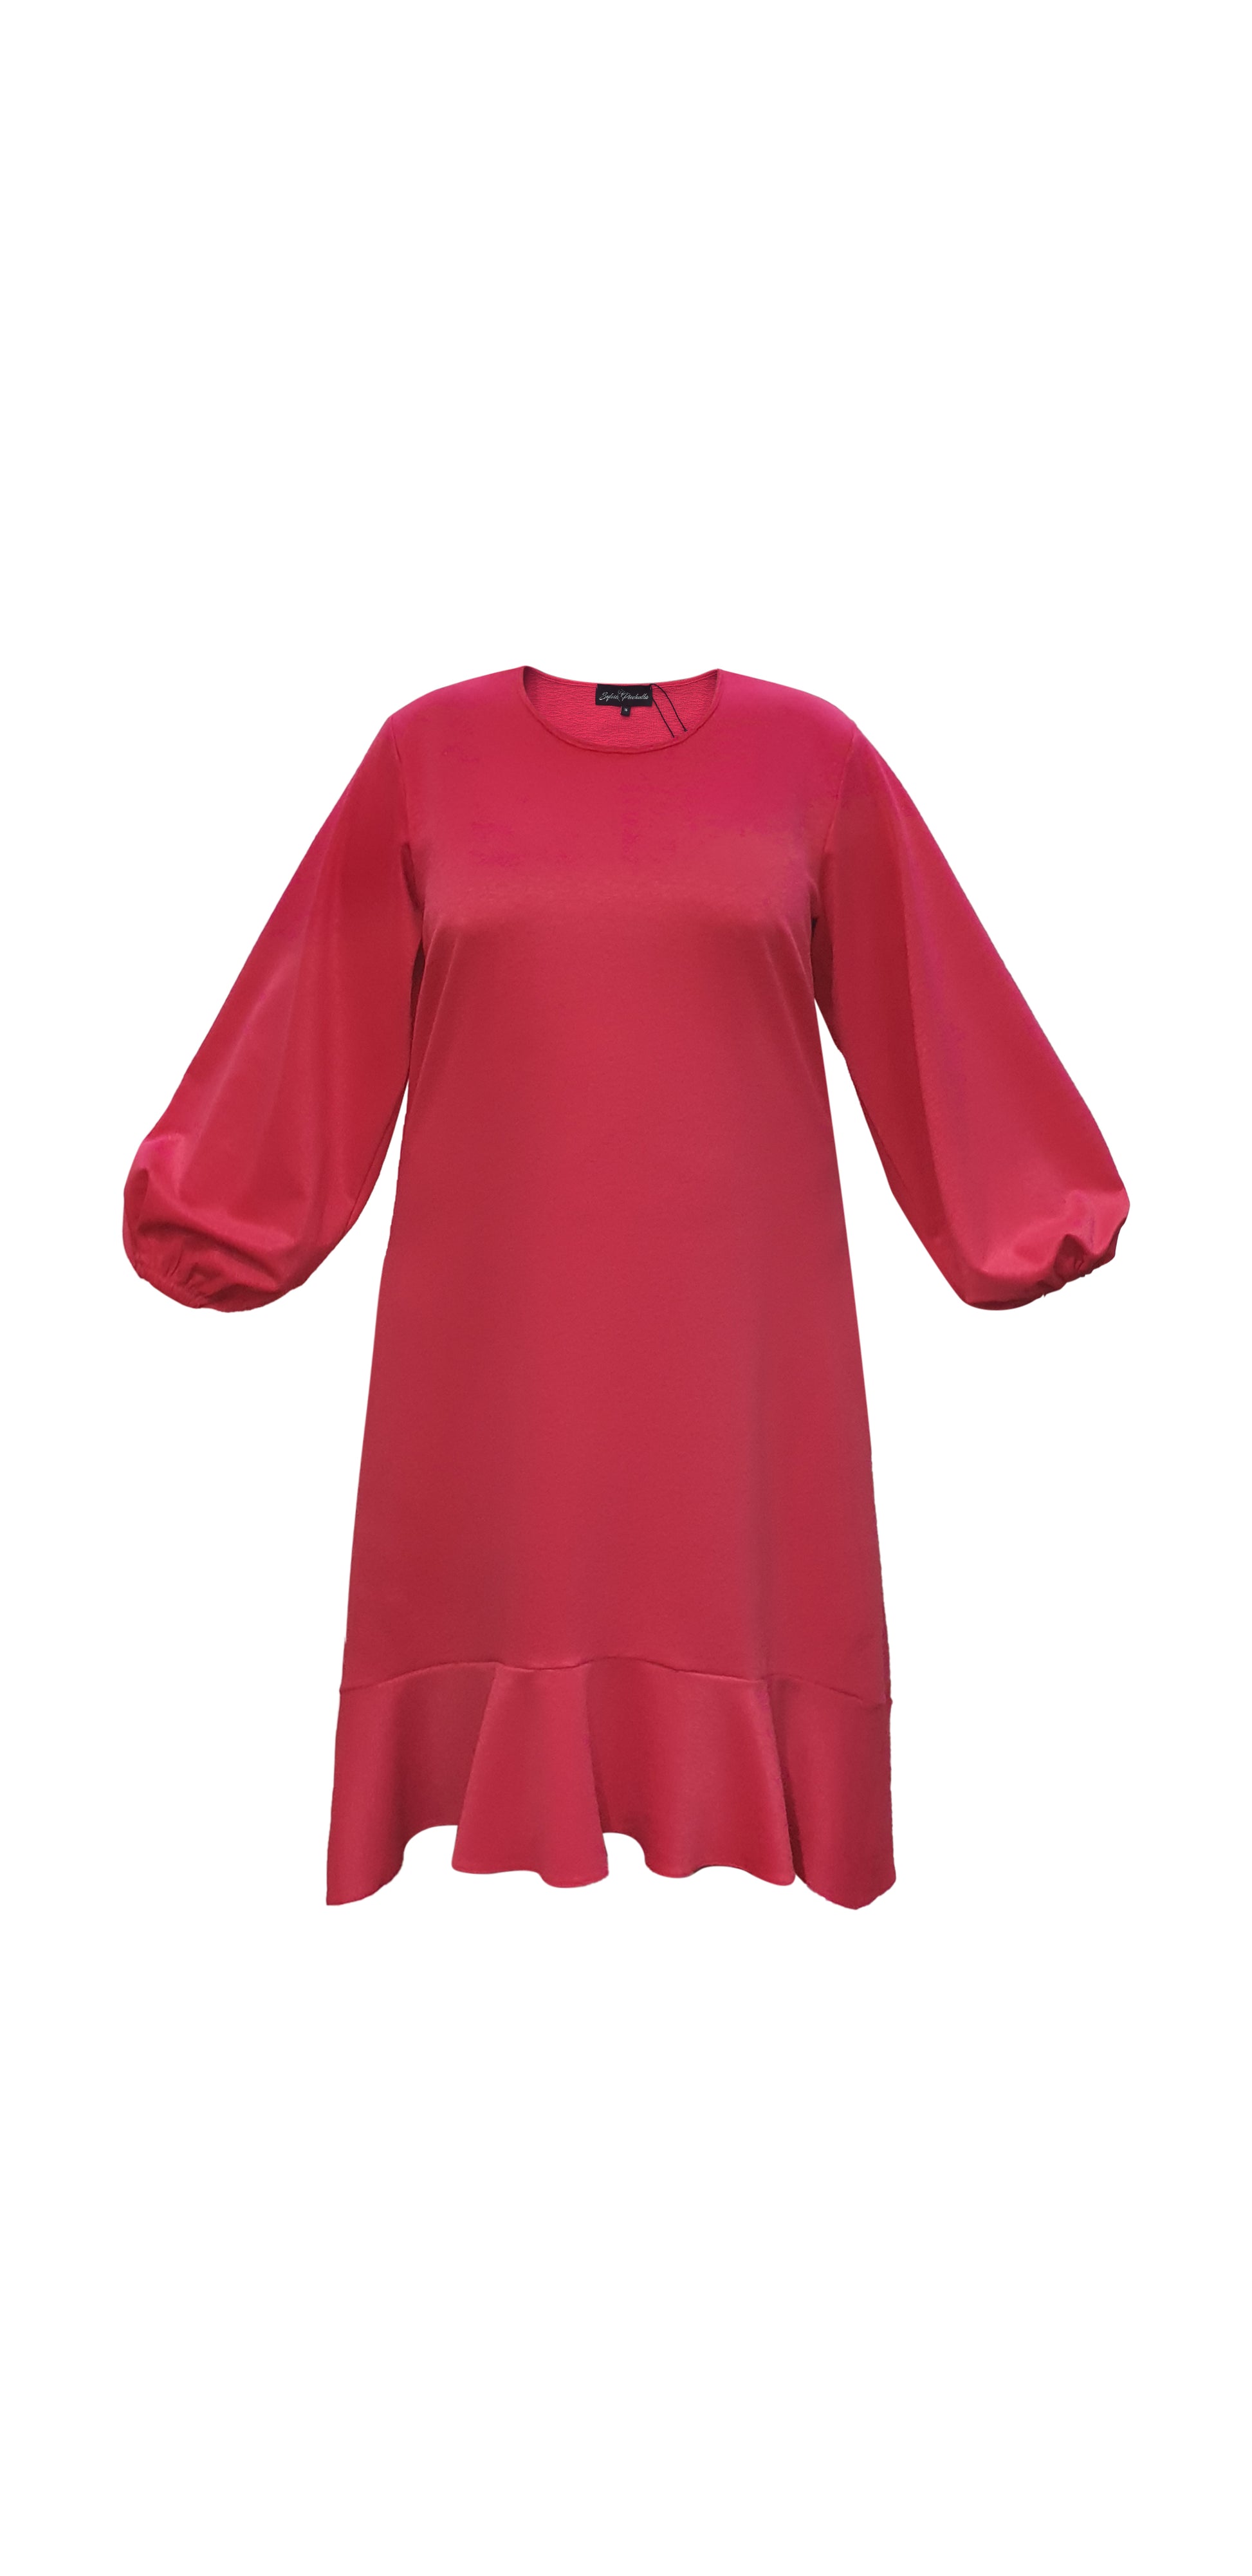 Women's Plus Size Pink Magenta Midi Dobby Jacquard Dress displayed as a cutout on an invisible mannequin.